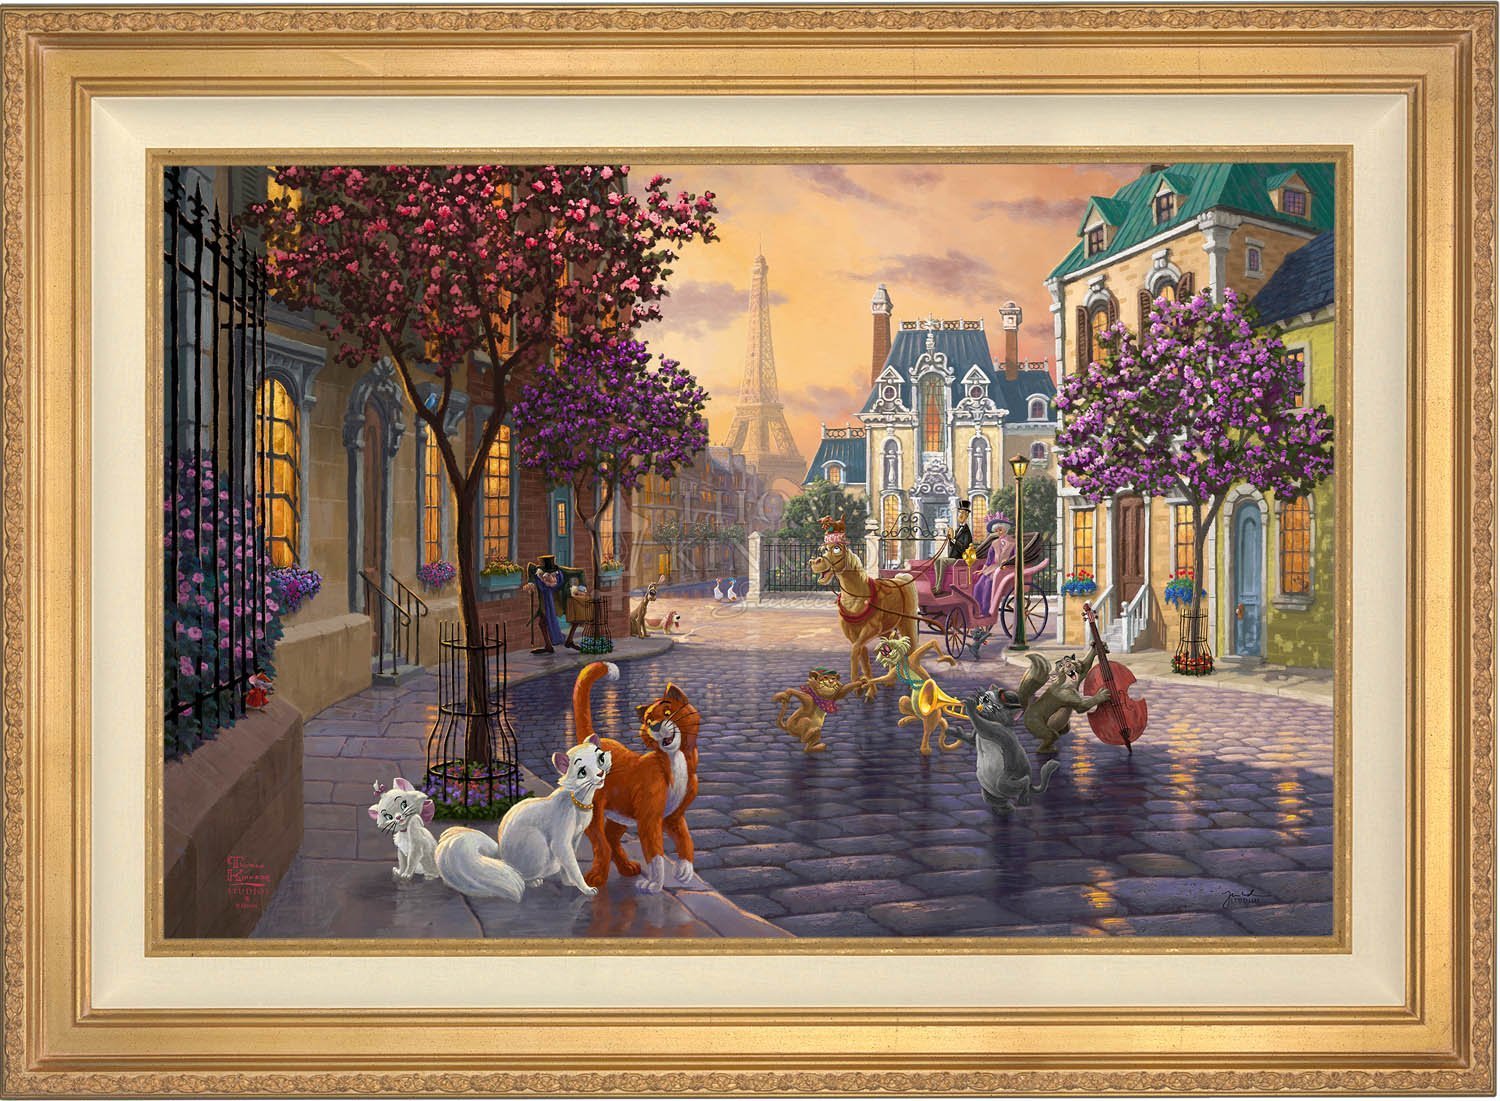 In a Paris neighborhood romance sparks. The older man on the left is Georges, Thomas O’Malley, Duchess and Marie are enjoy an afternoon together - Antique Gold Frame